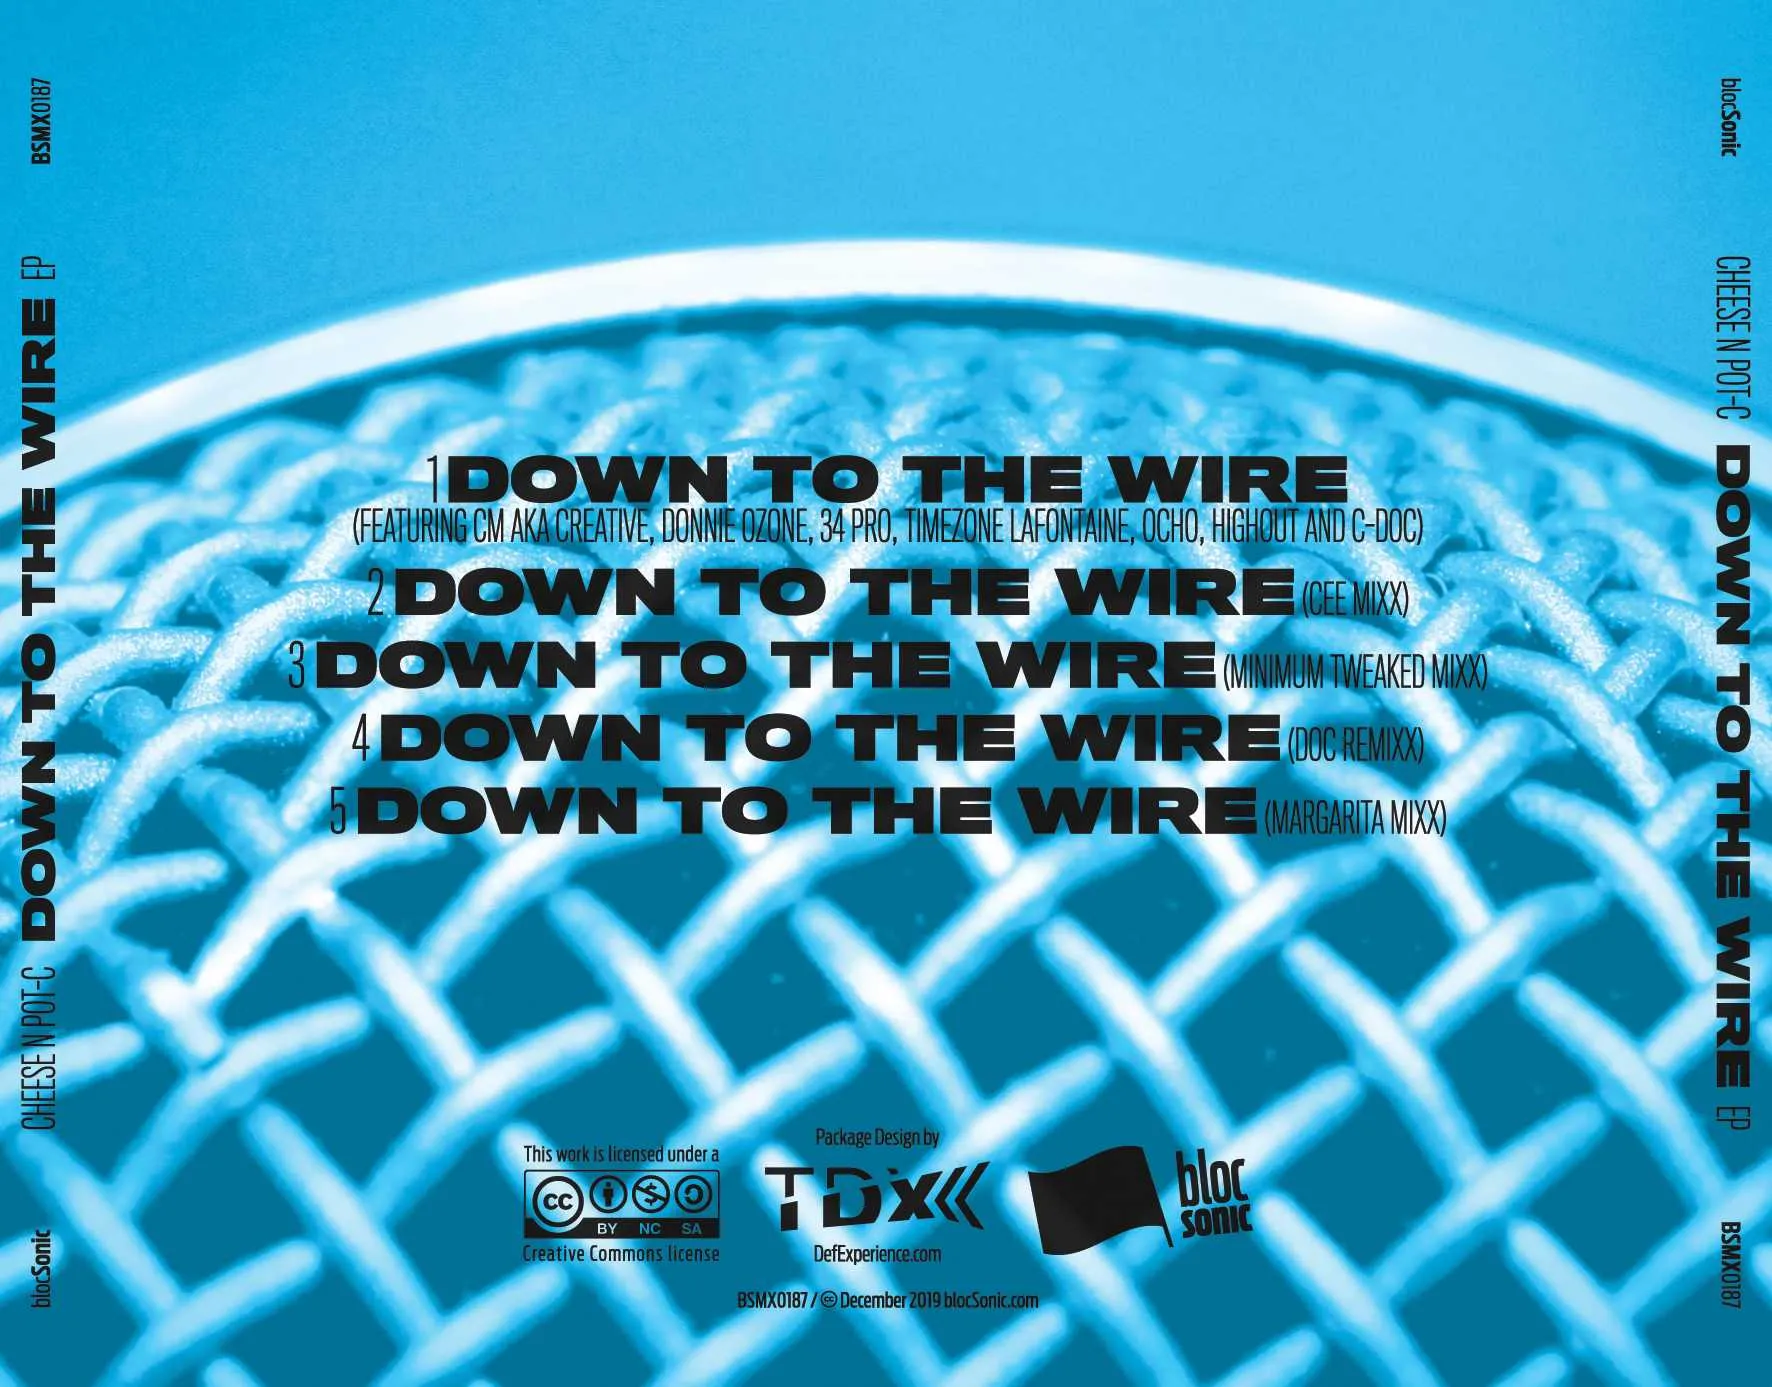 Album traycard for “Down To The Wire EP” by Cheese N Pot-C